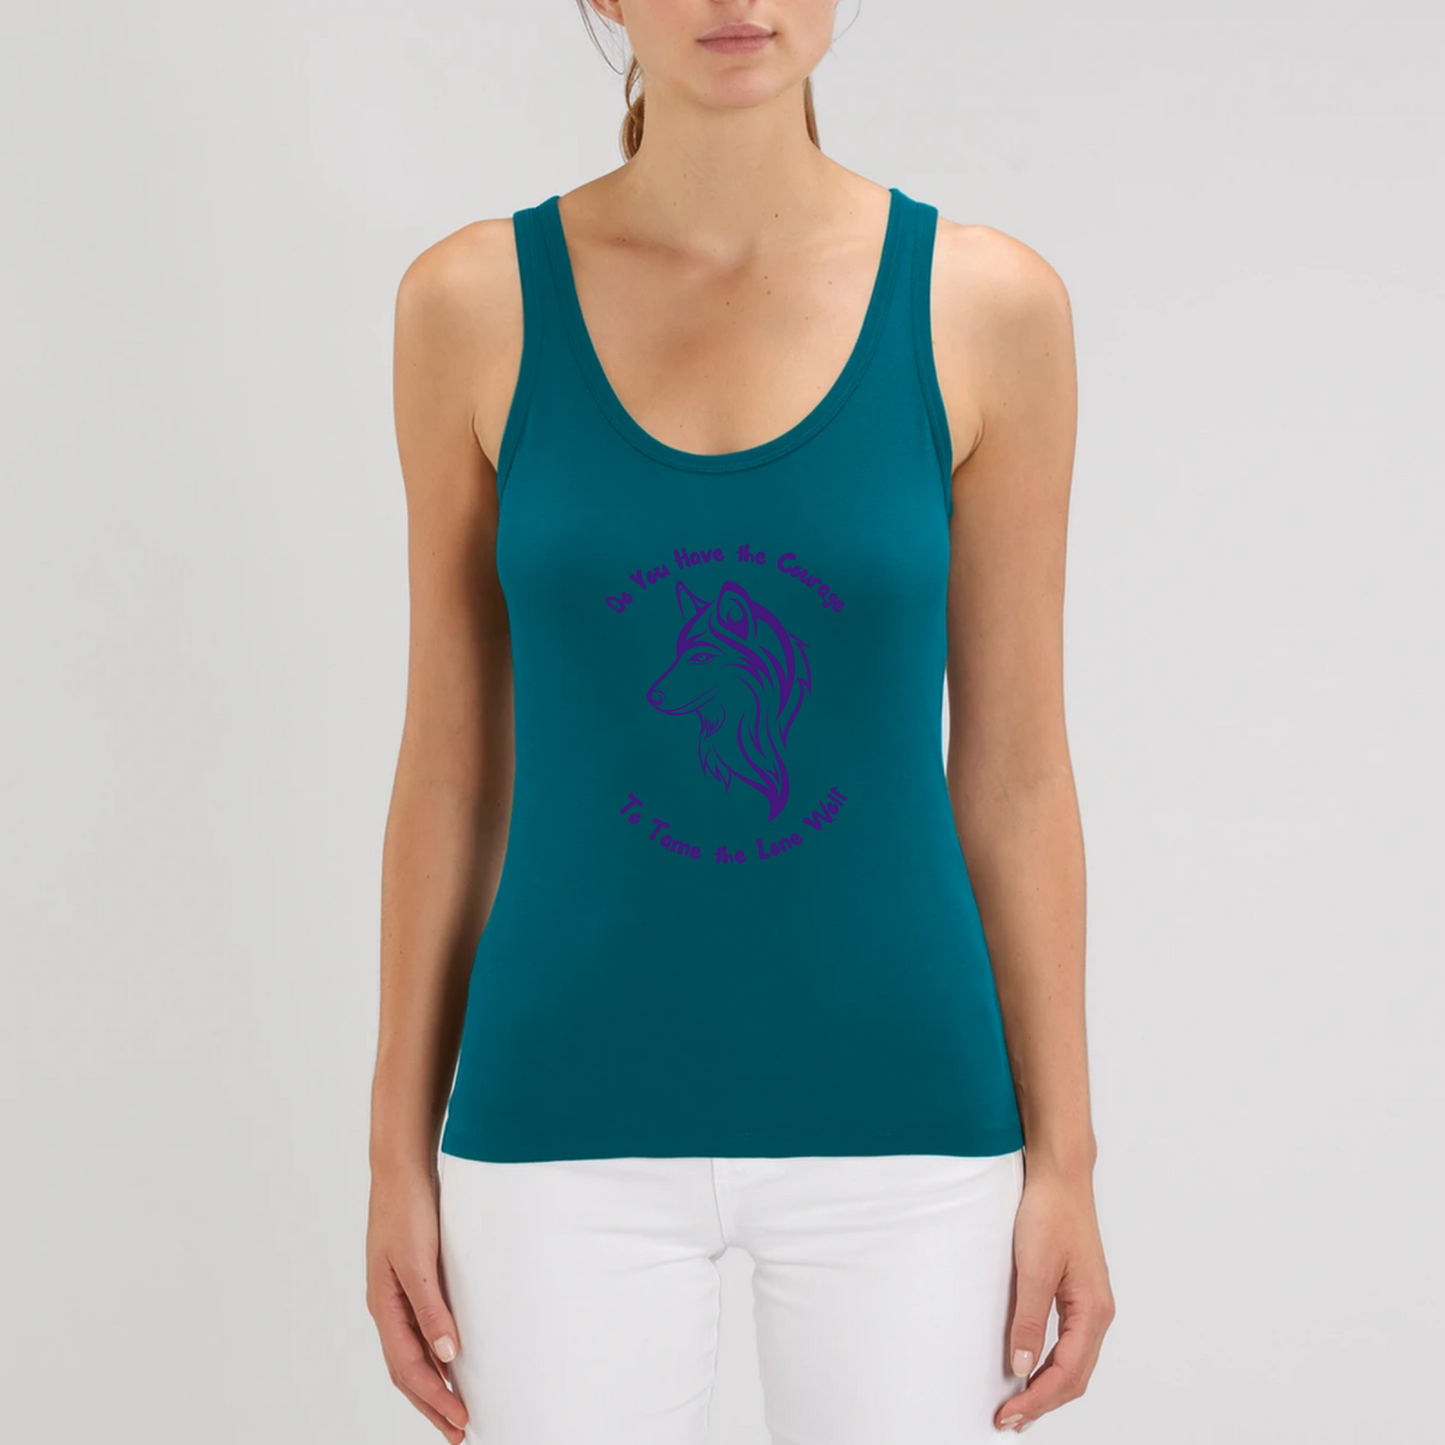 Model wearing a tank top with graphic design of a lone female wolf with wording Do you have the courage to tame the lone wolf. The tank top is ocean blue